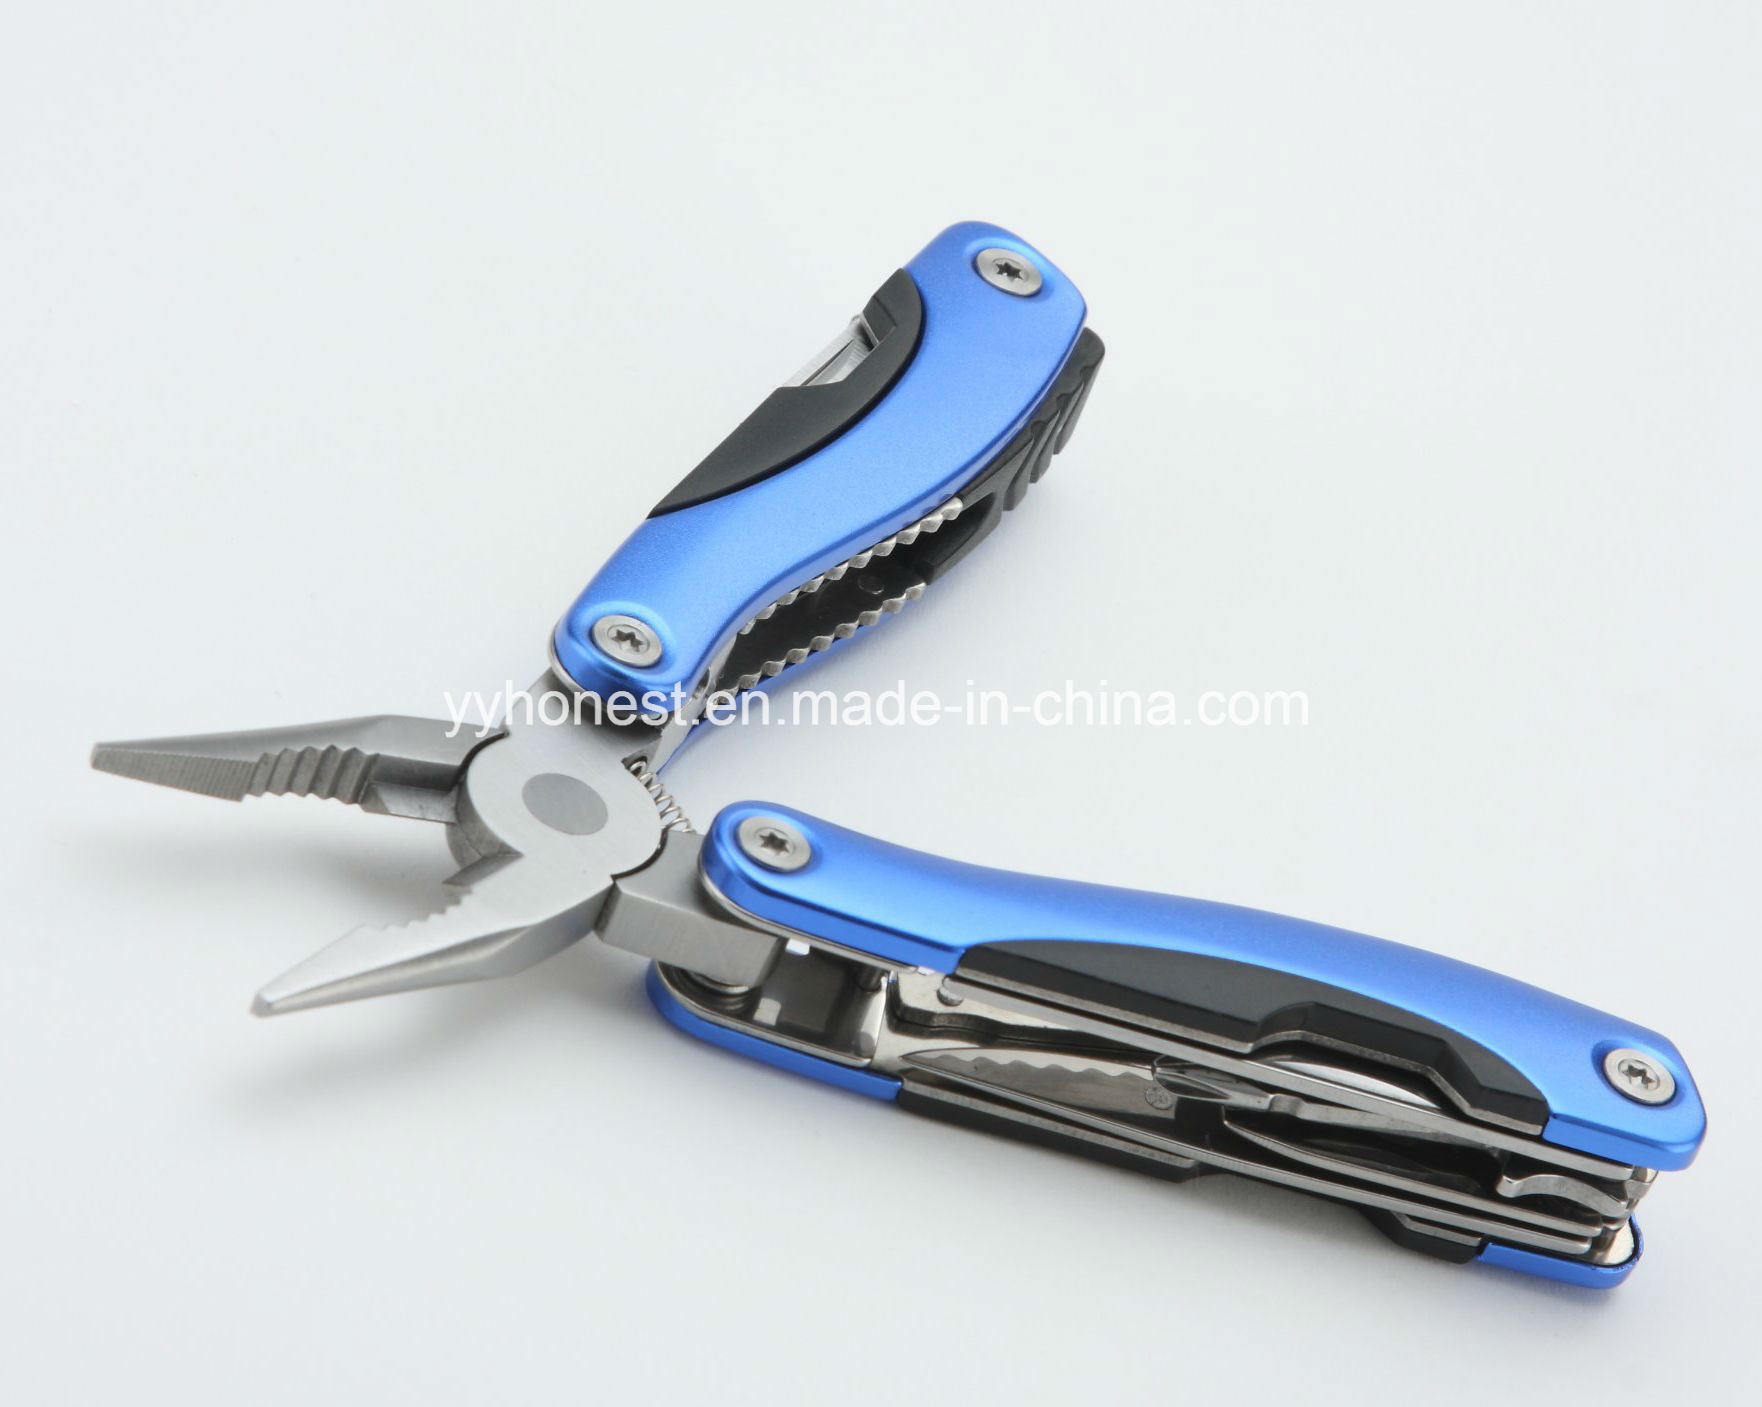 Manufacturing Mini Multi Tool for Travel and Outdoor for Wholesales